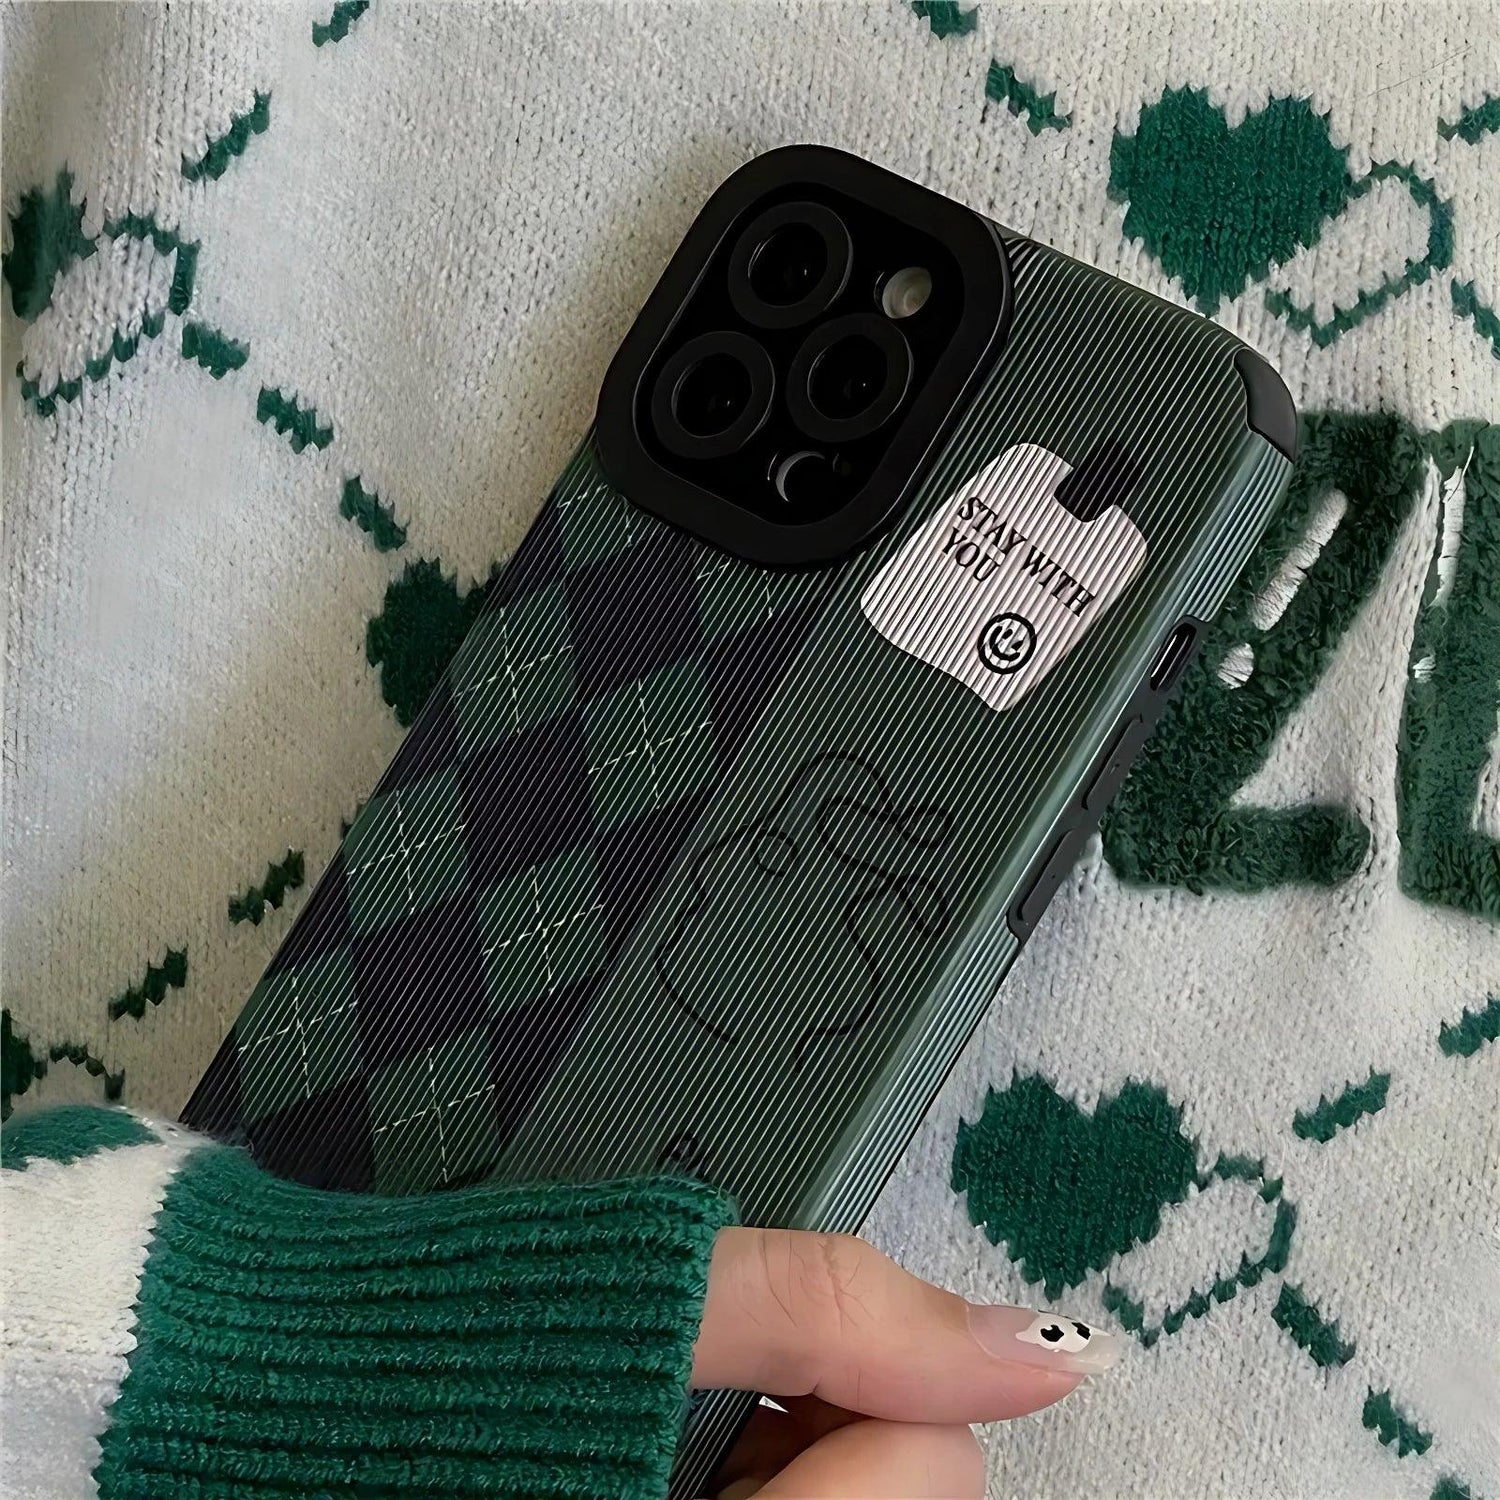 iphone 11 pro max cover louis vuittons